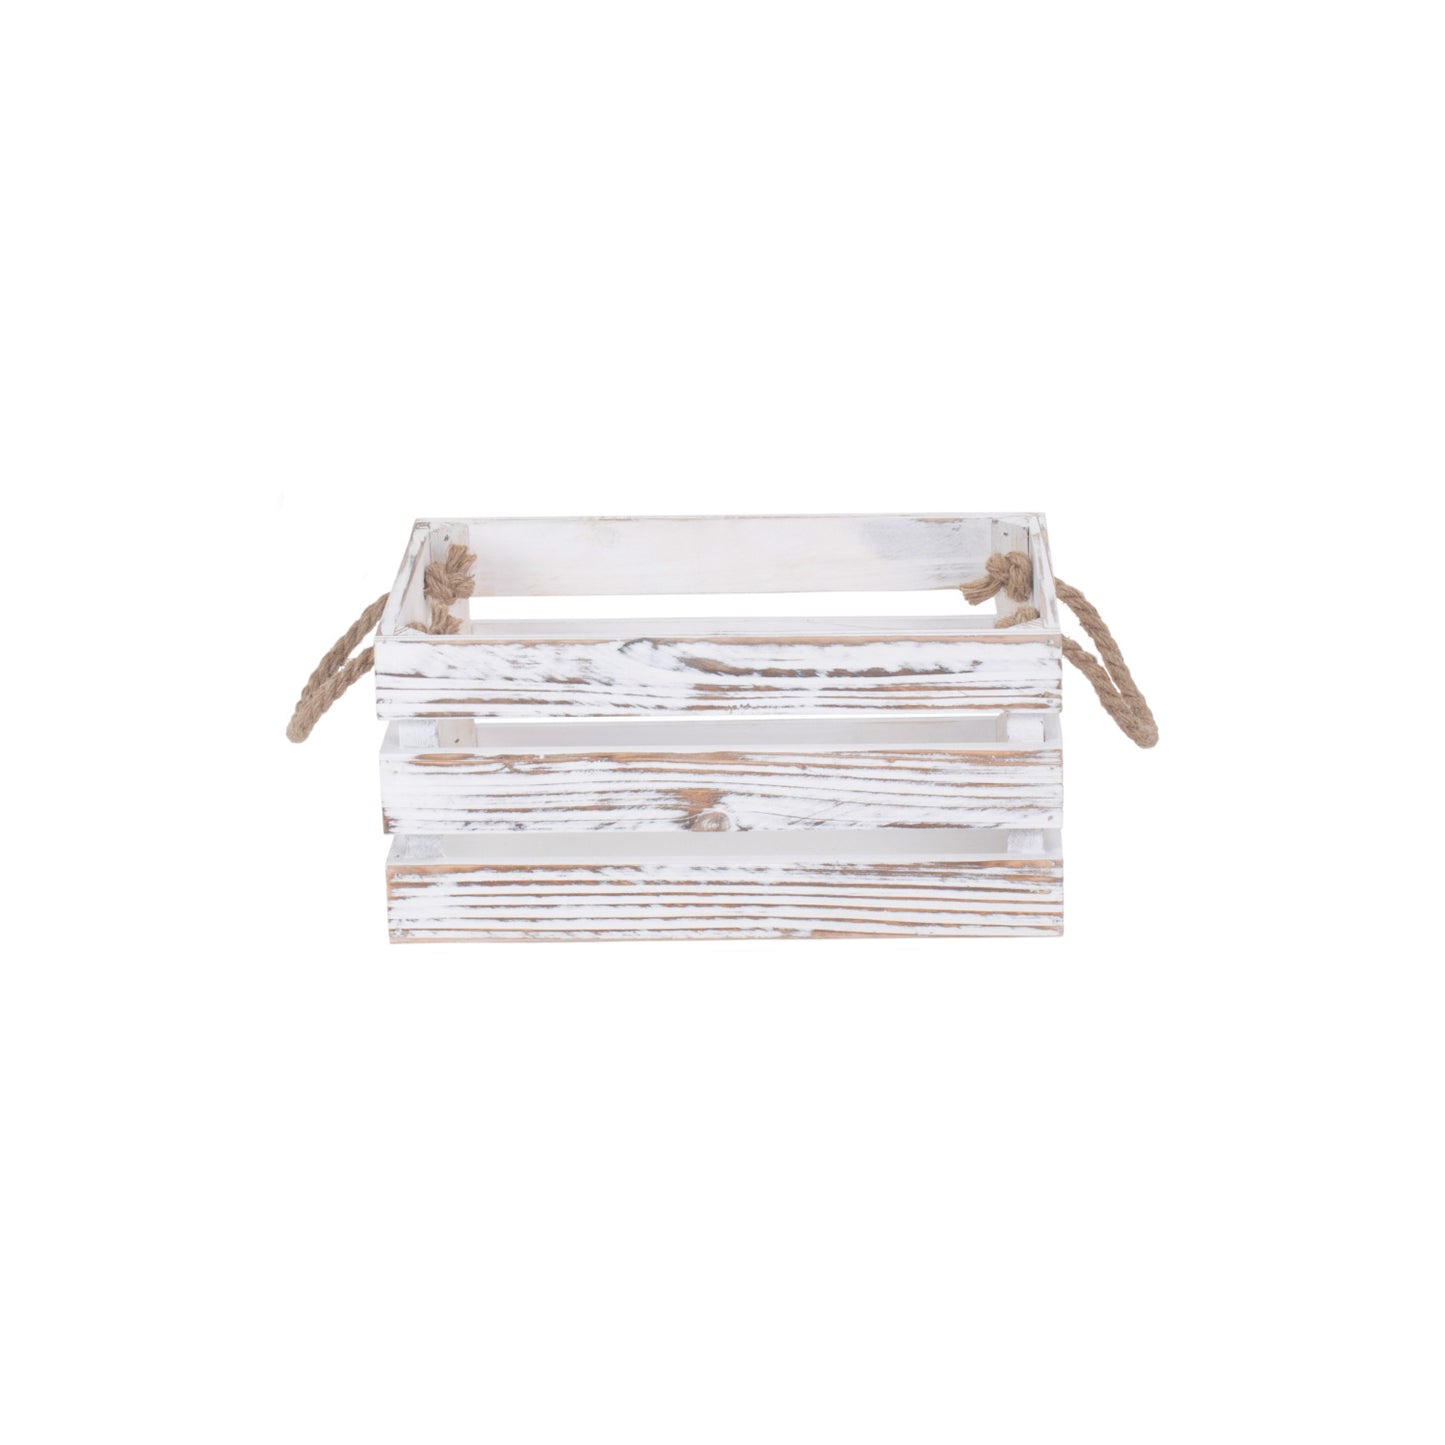 Small Distressed White Rope Handled Crate